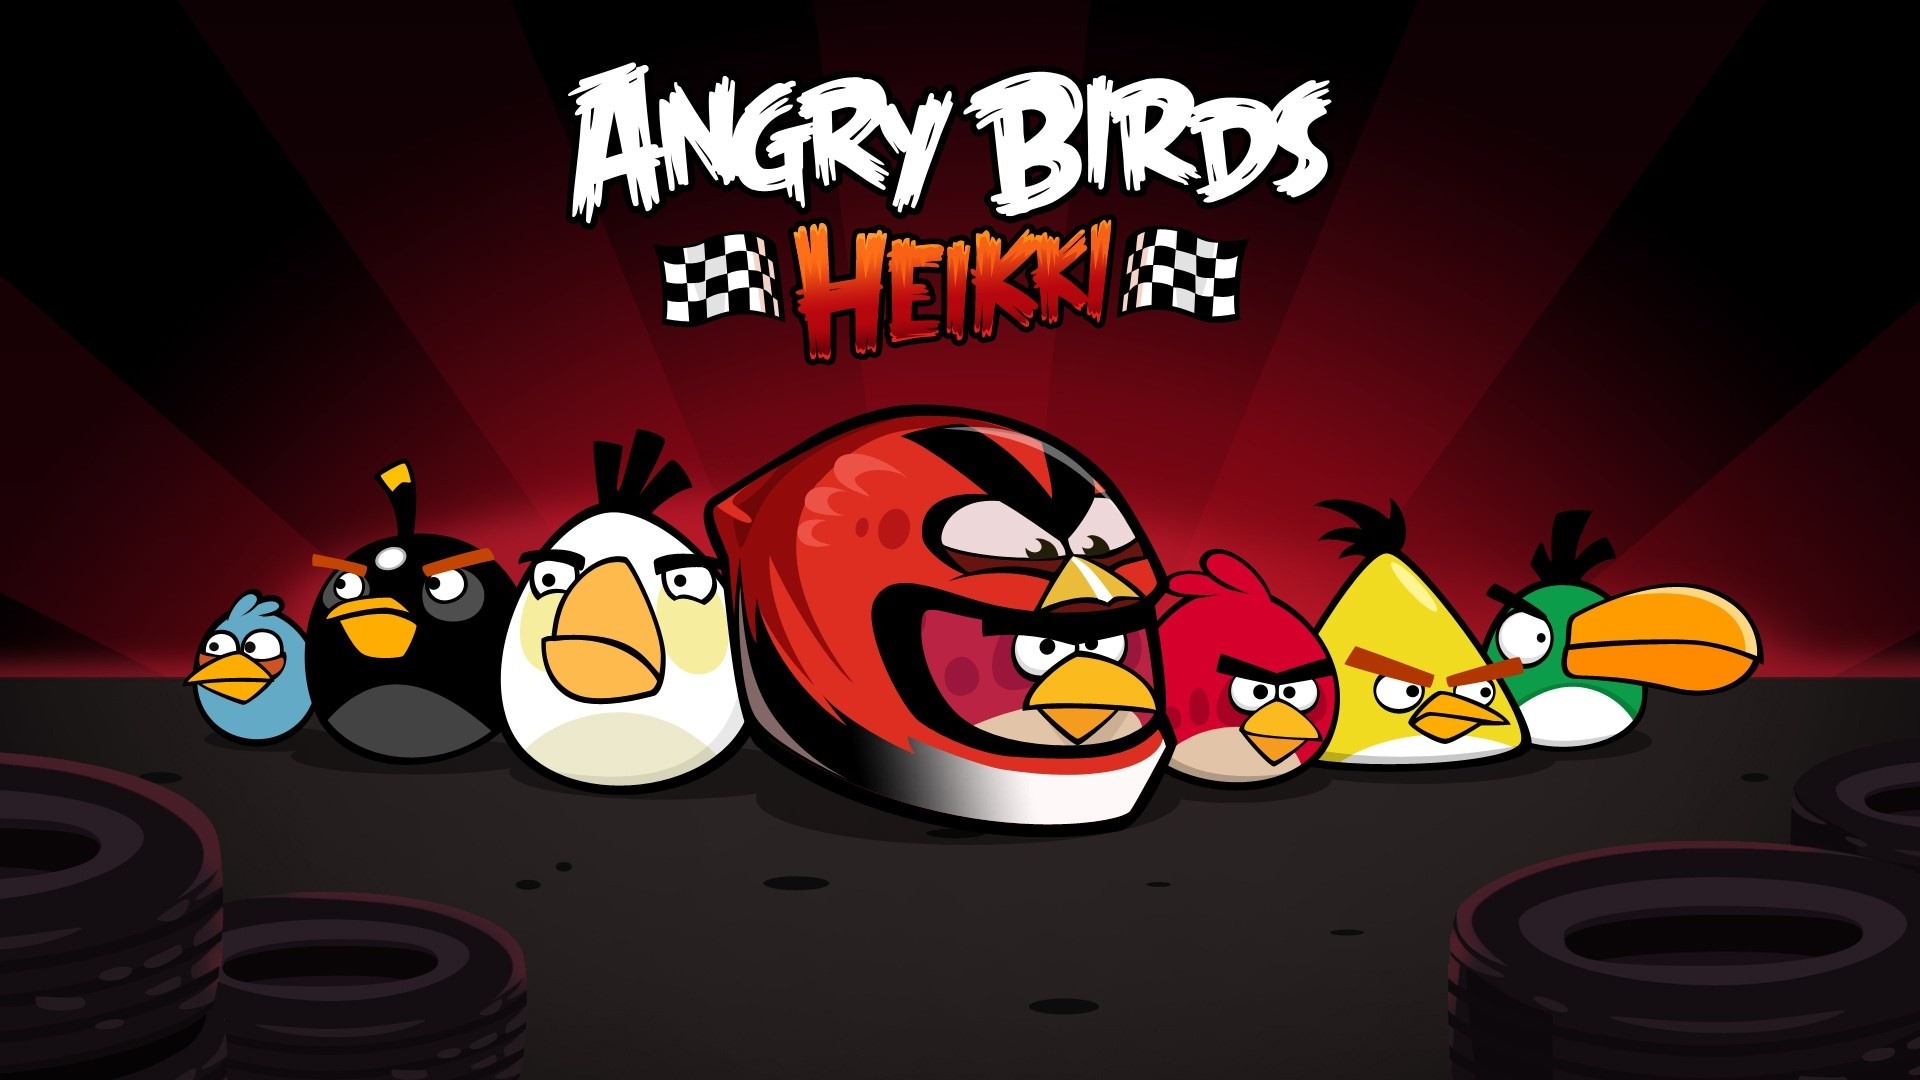 Angry Birds Game Wallpapers #9 - 1920x1080